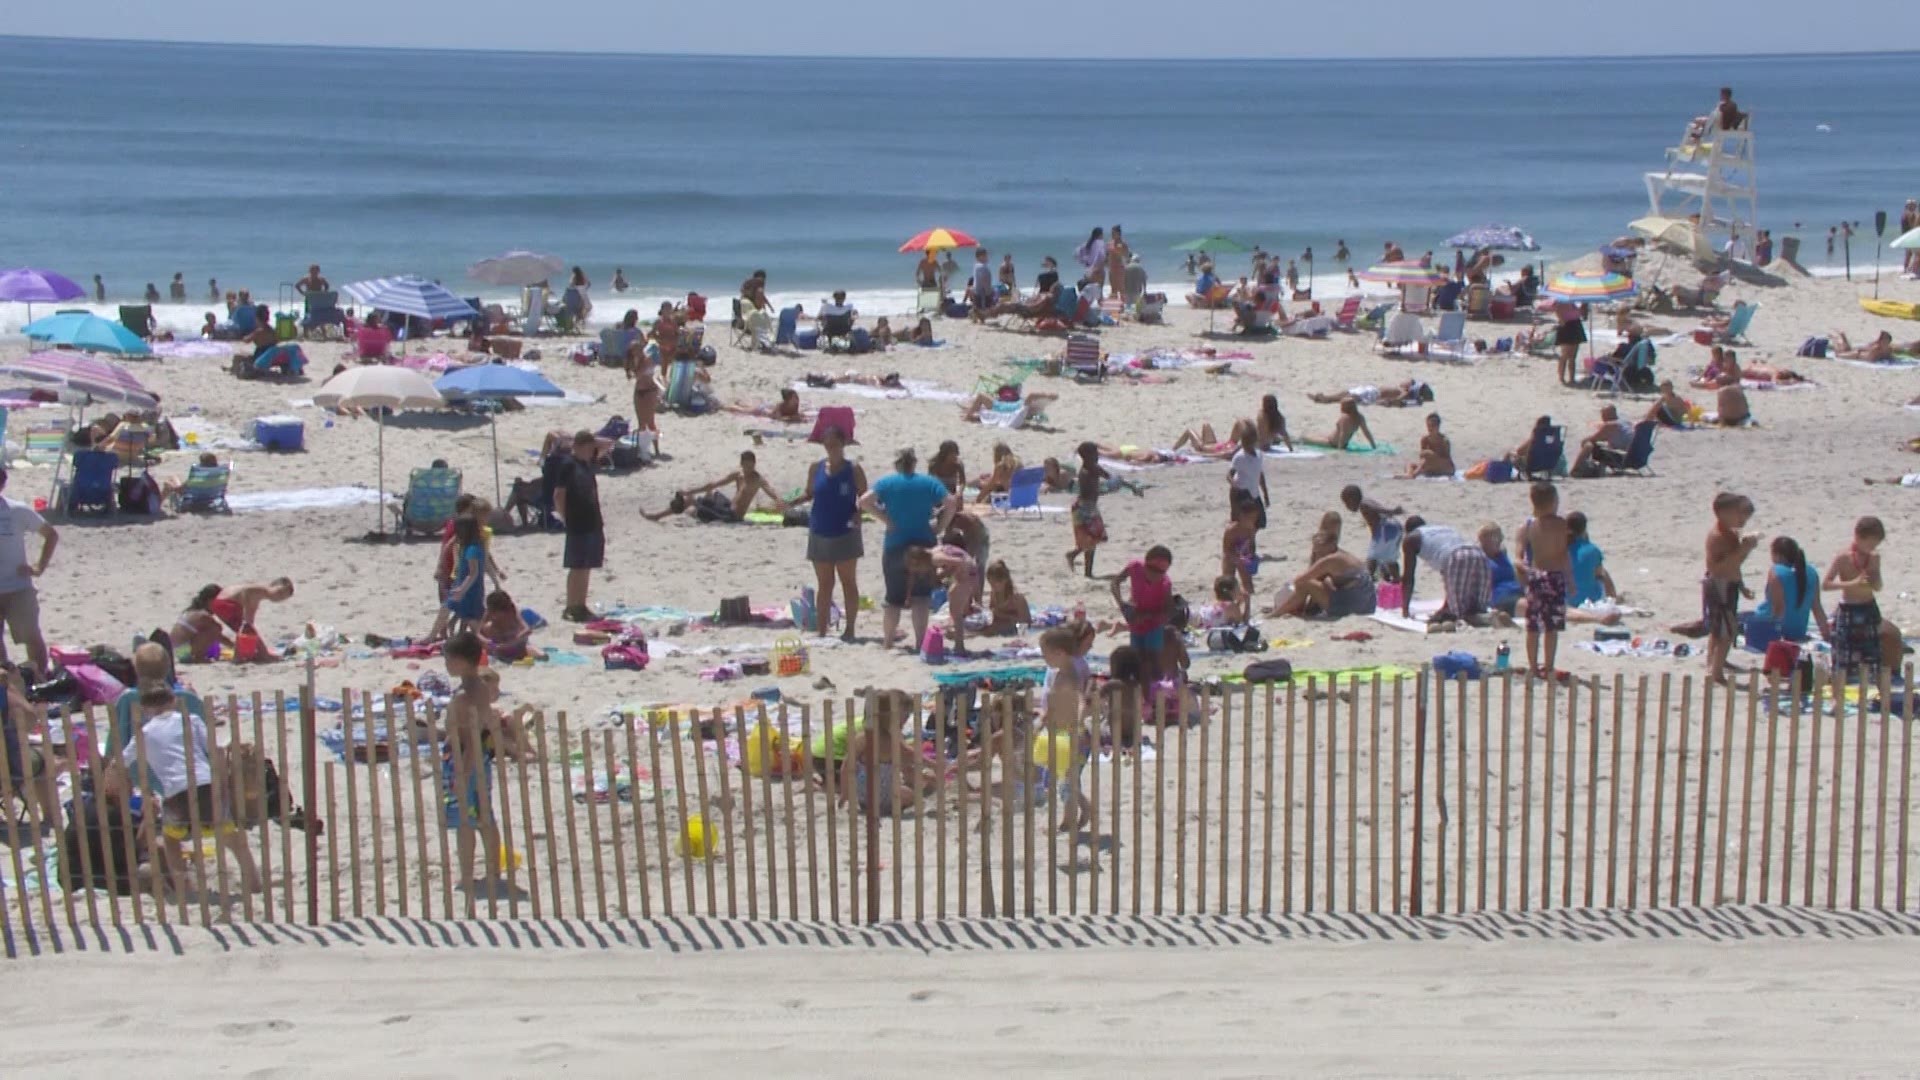 Consumer Reports has some important tips on how to have safe fun in the sun.